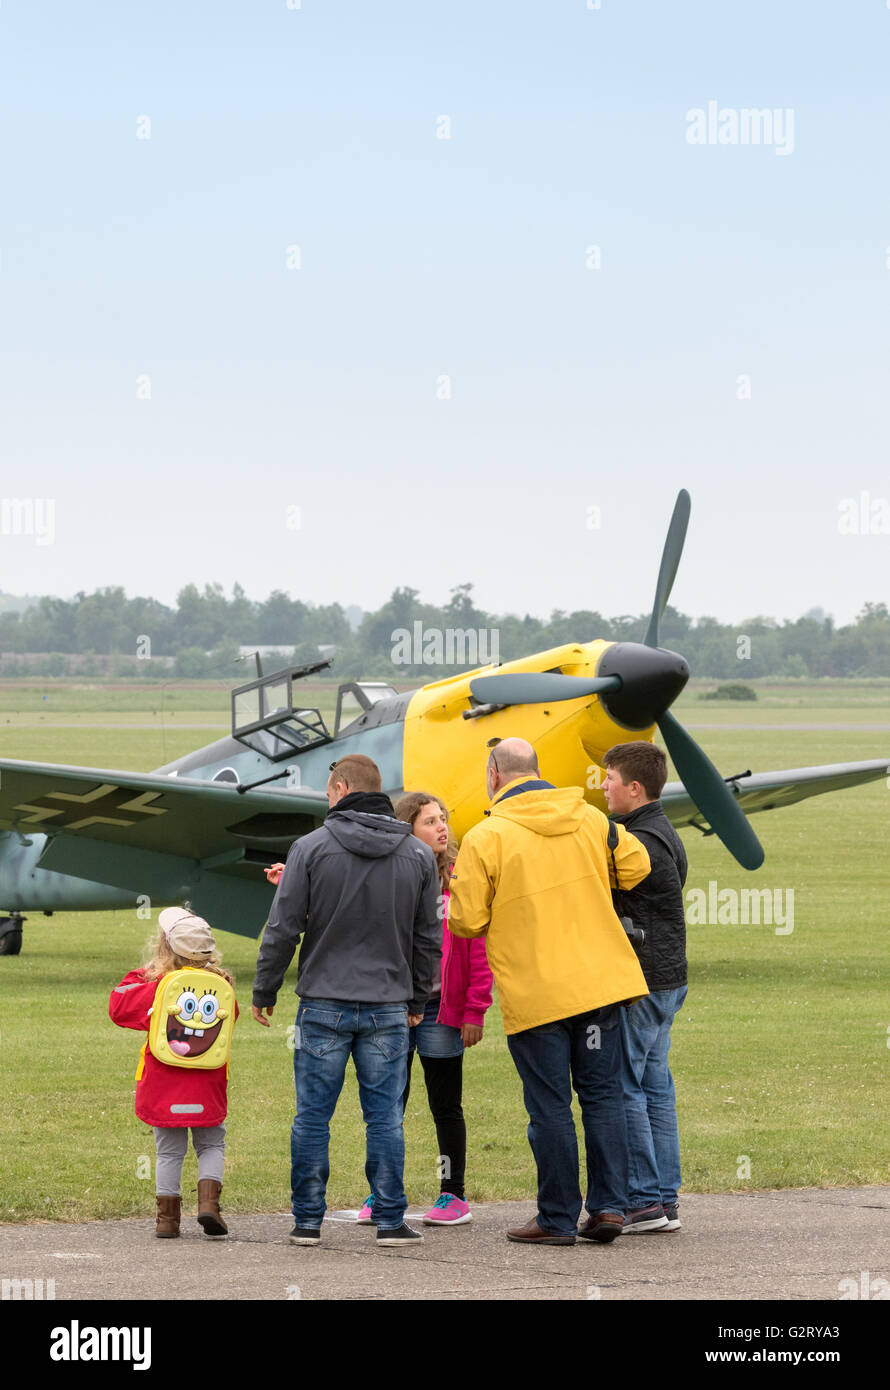 World War 2 education. A family with children looking at a vintage WW2 plane, Duxford Airshow, Imperial War Museum Duxford IWM, Cambridgeshire UK Stock Photo